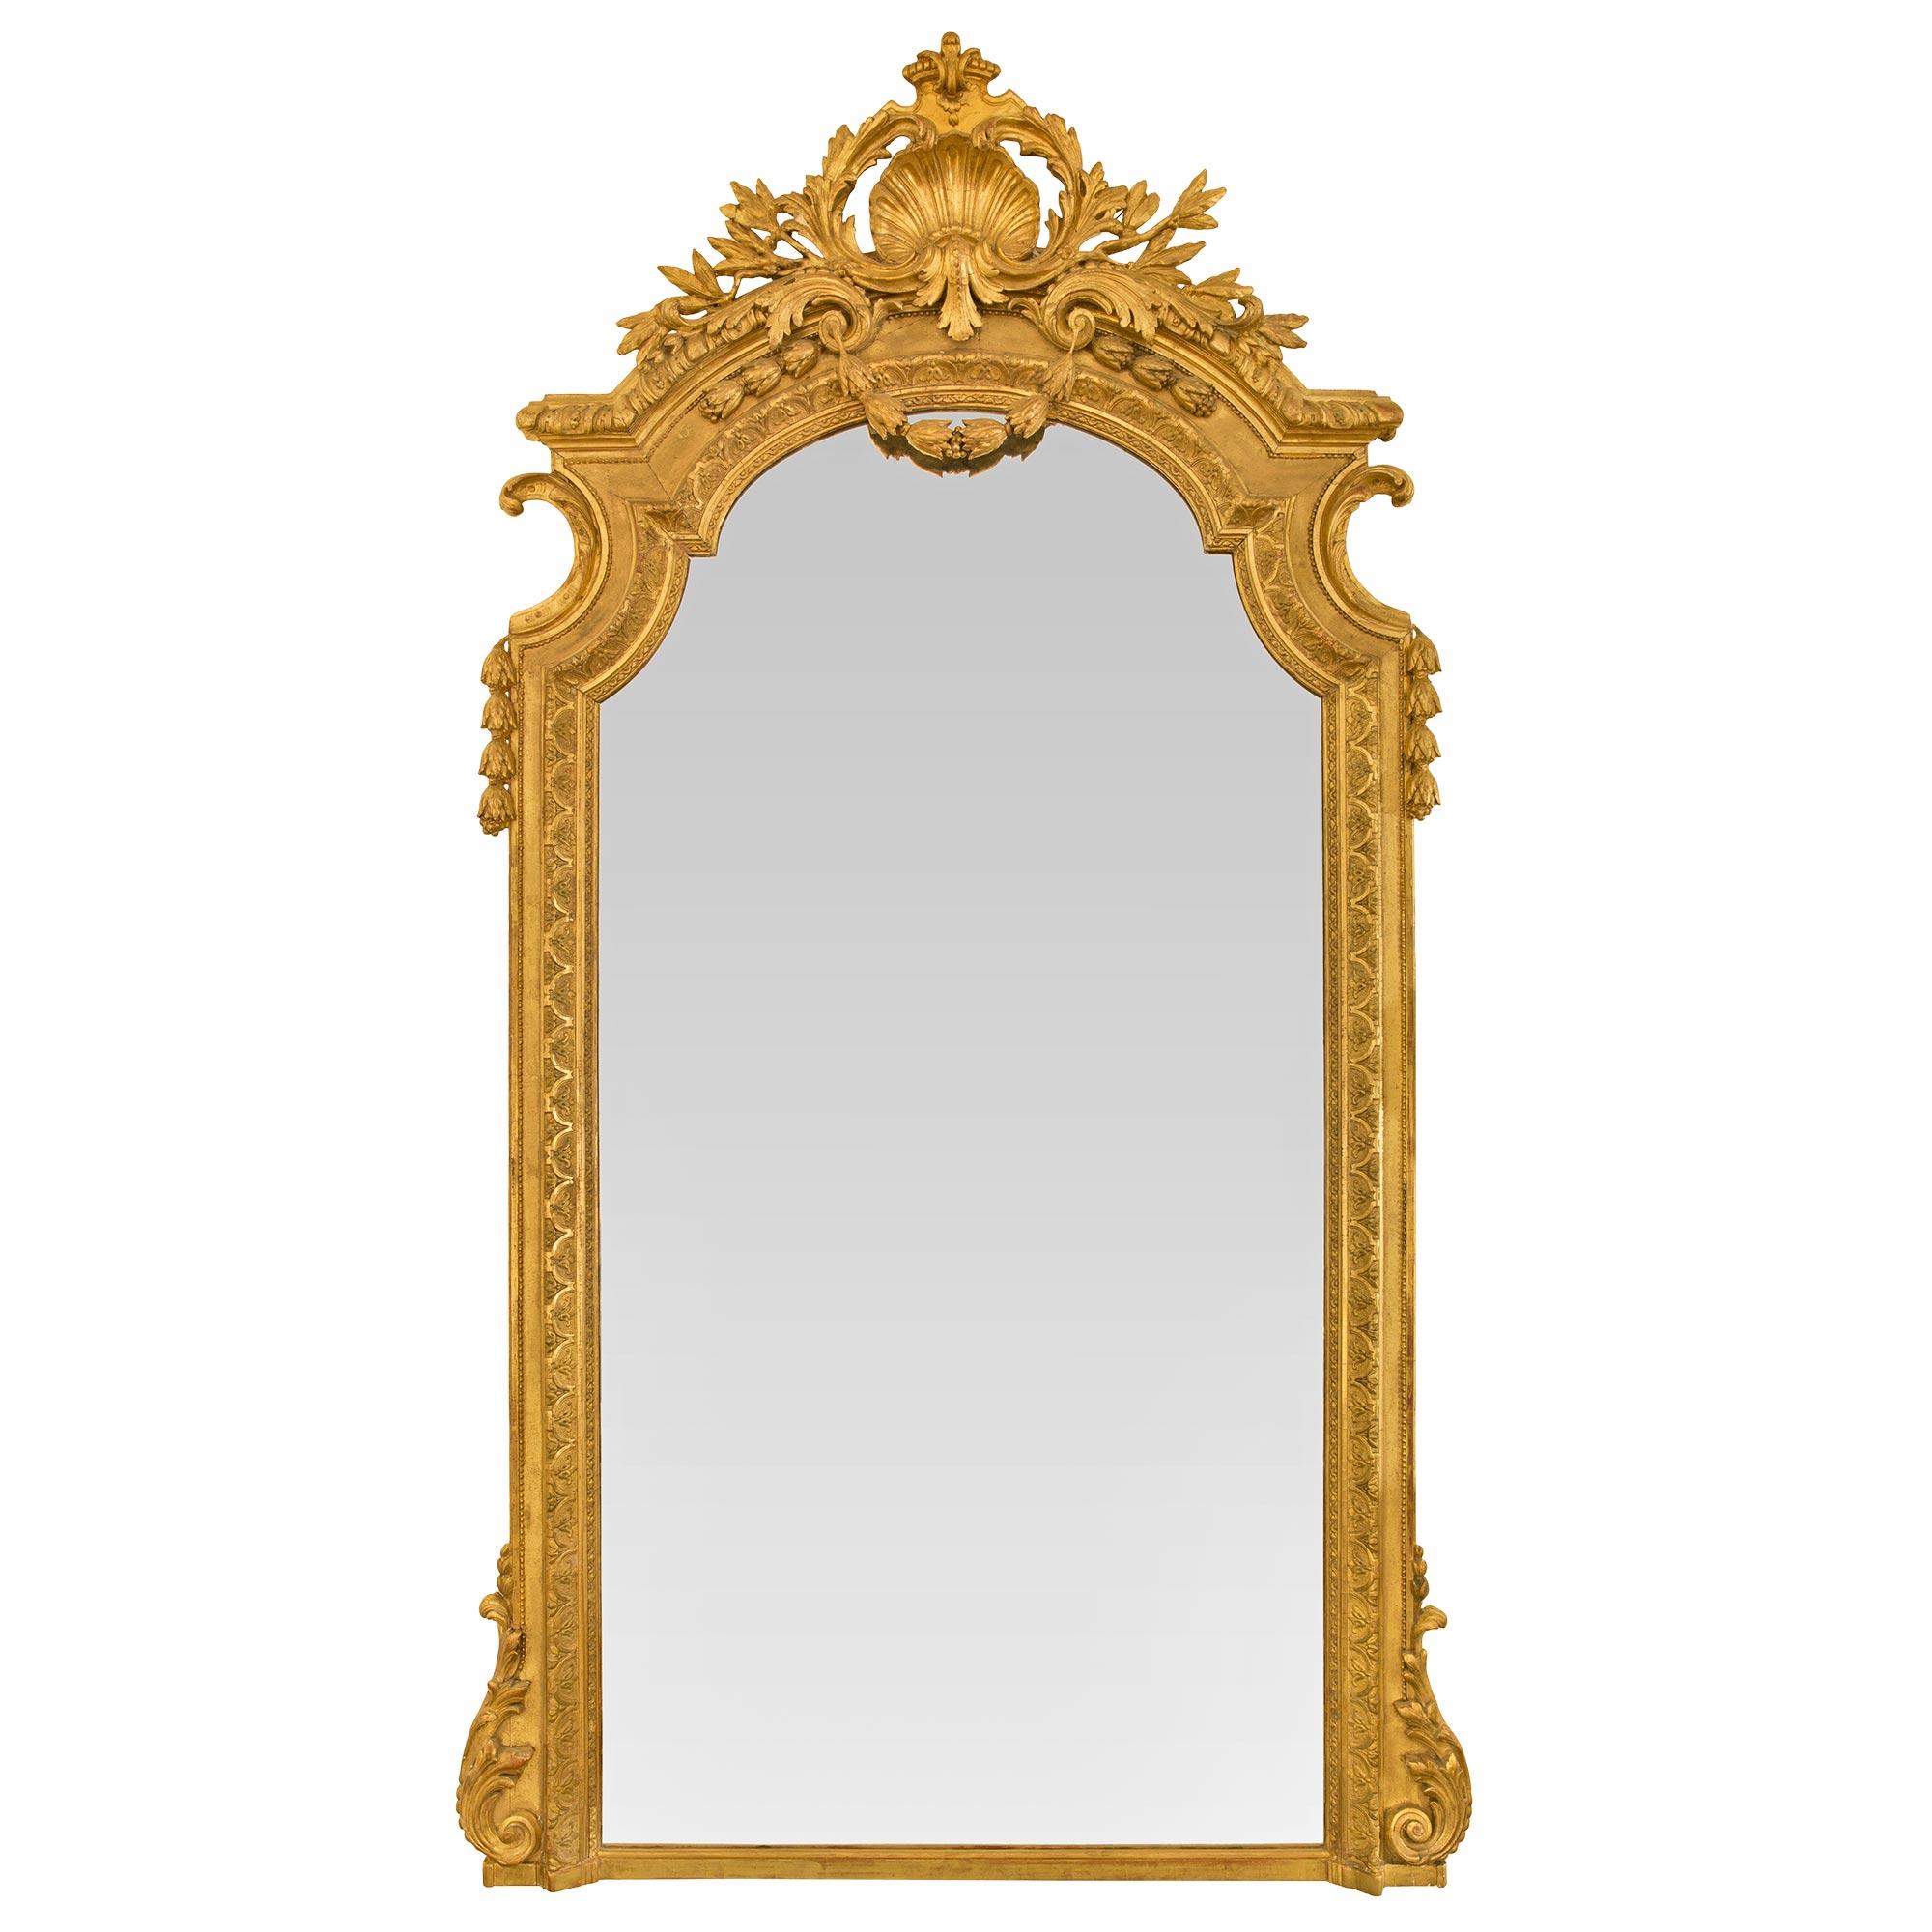 An impressive and large scale Italian 19th century Louis XVI st. giltwood mirror. The mirror displays an arched top with elegant lightly curved elements and is framed within a beautiful mottled border with a unique finely detailed sunburst like band